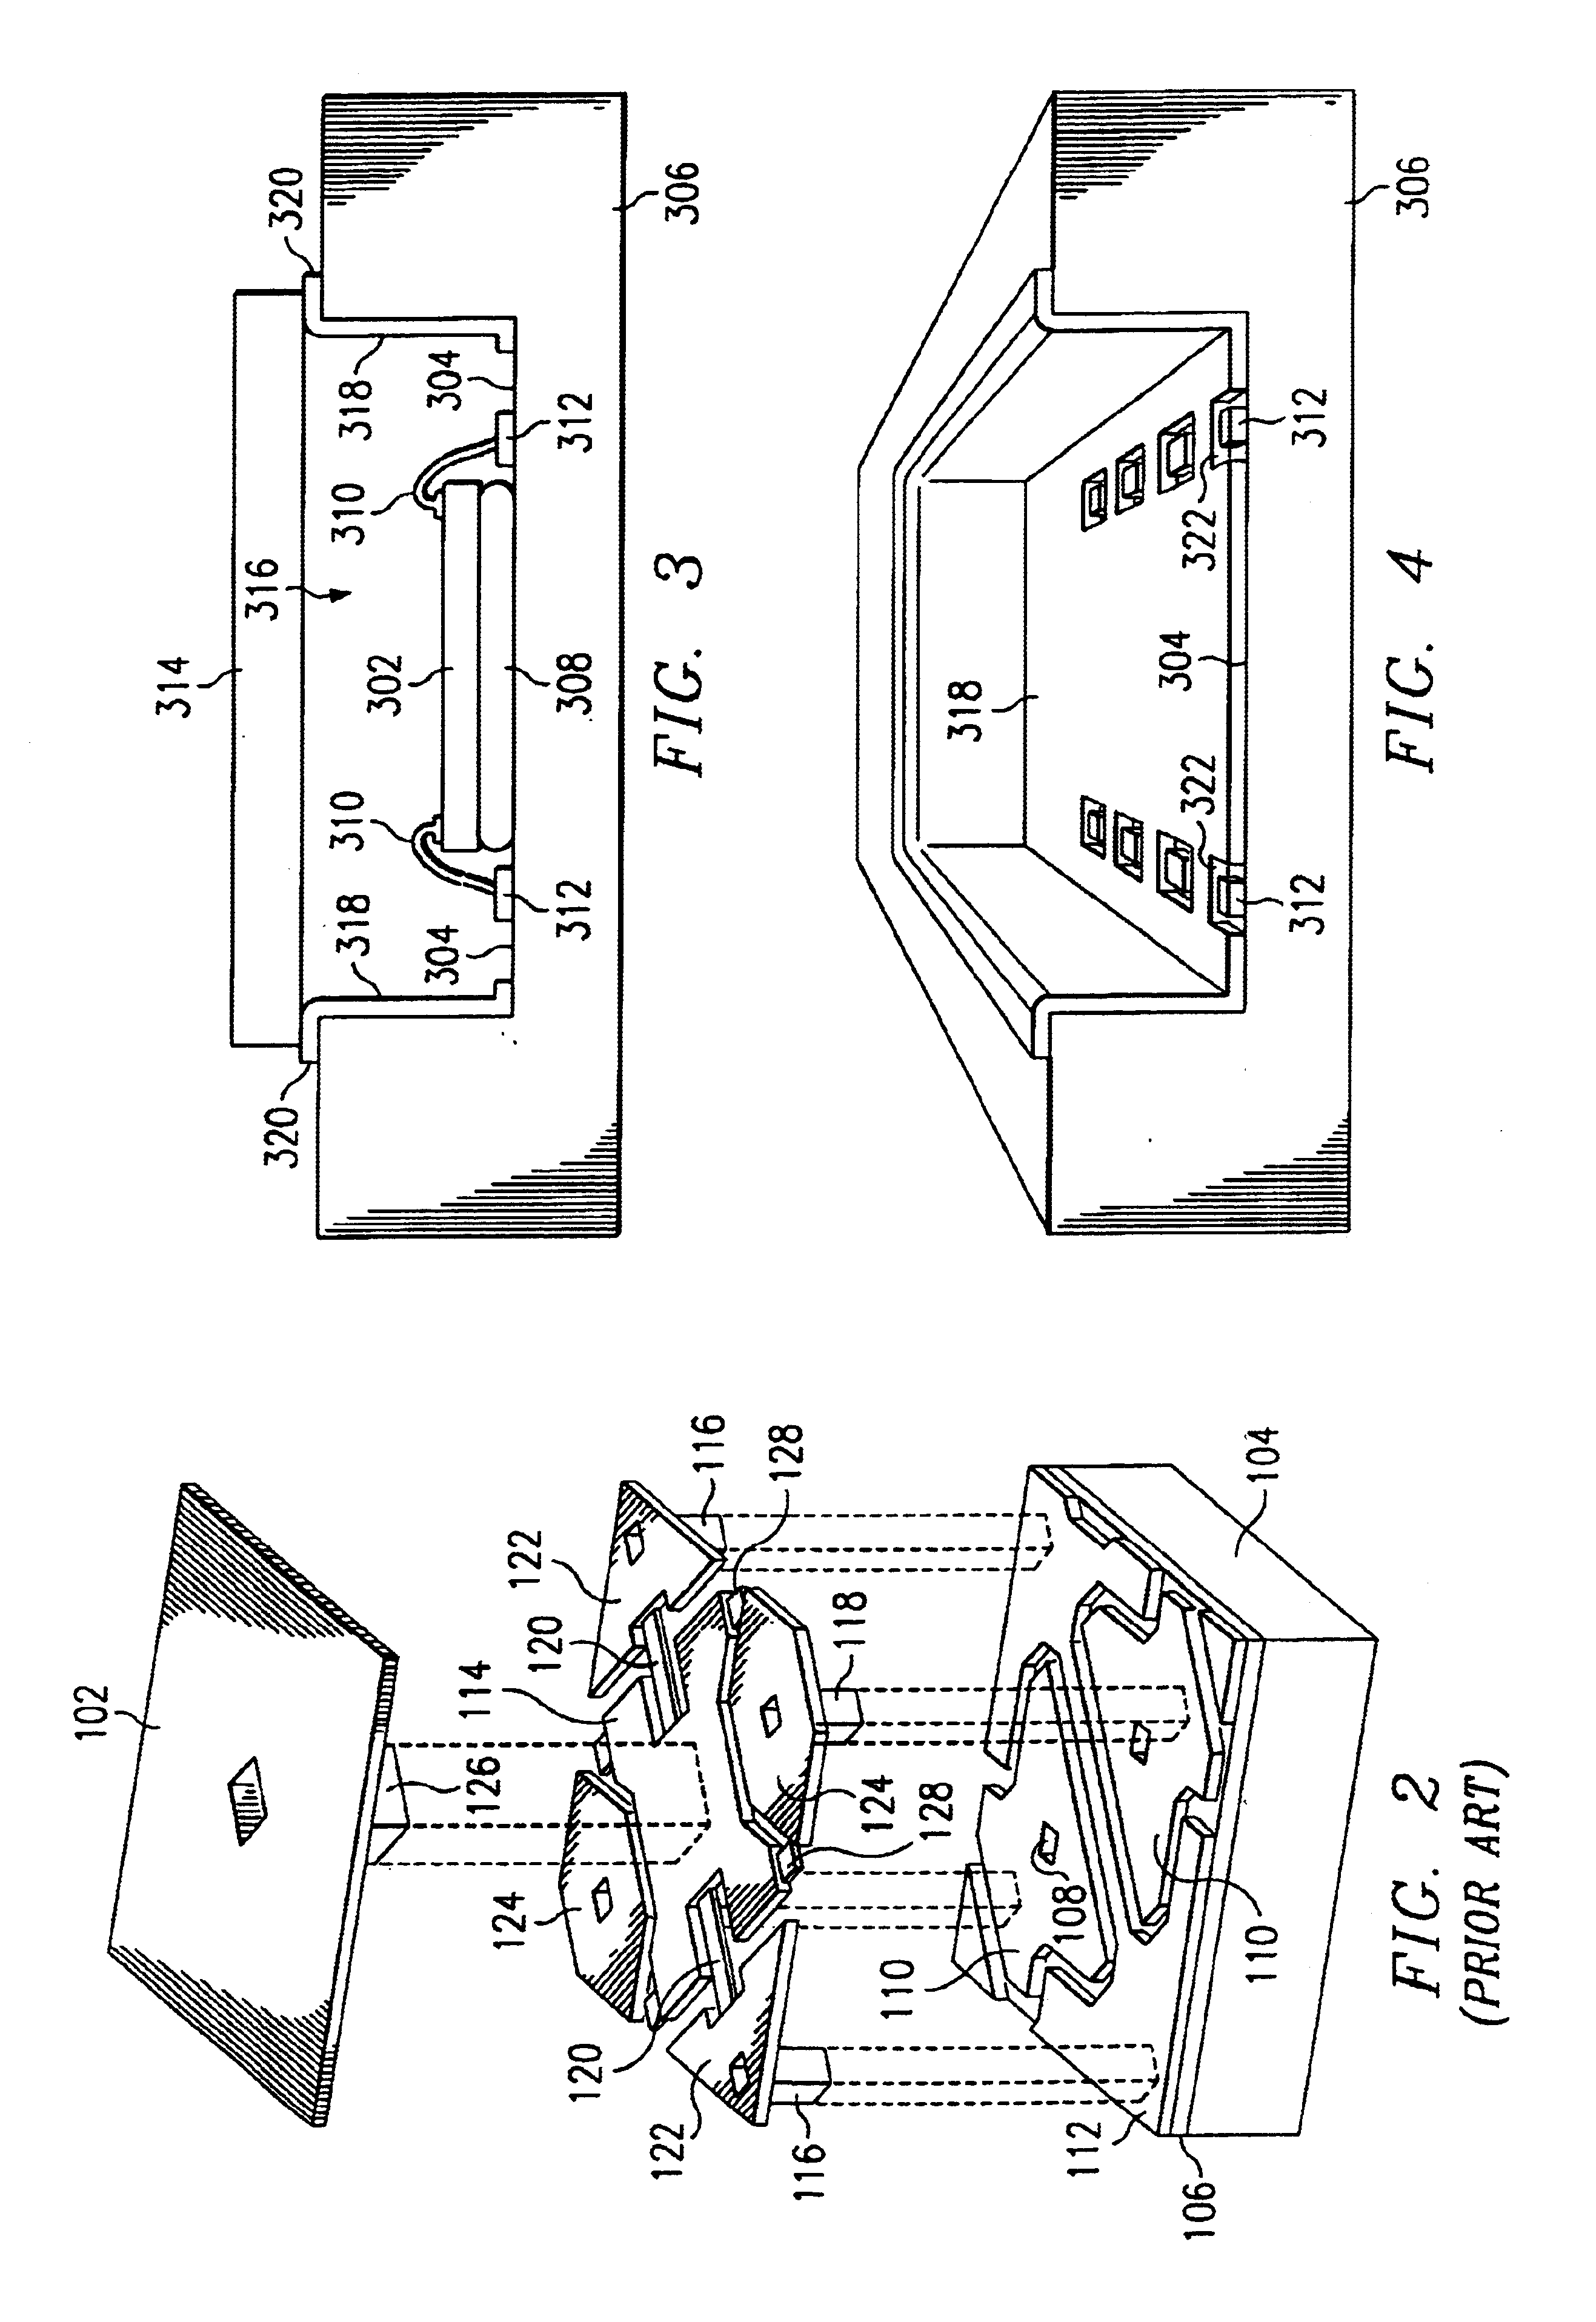 Masking layer in substrate cavity